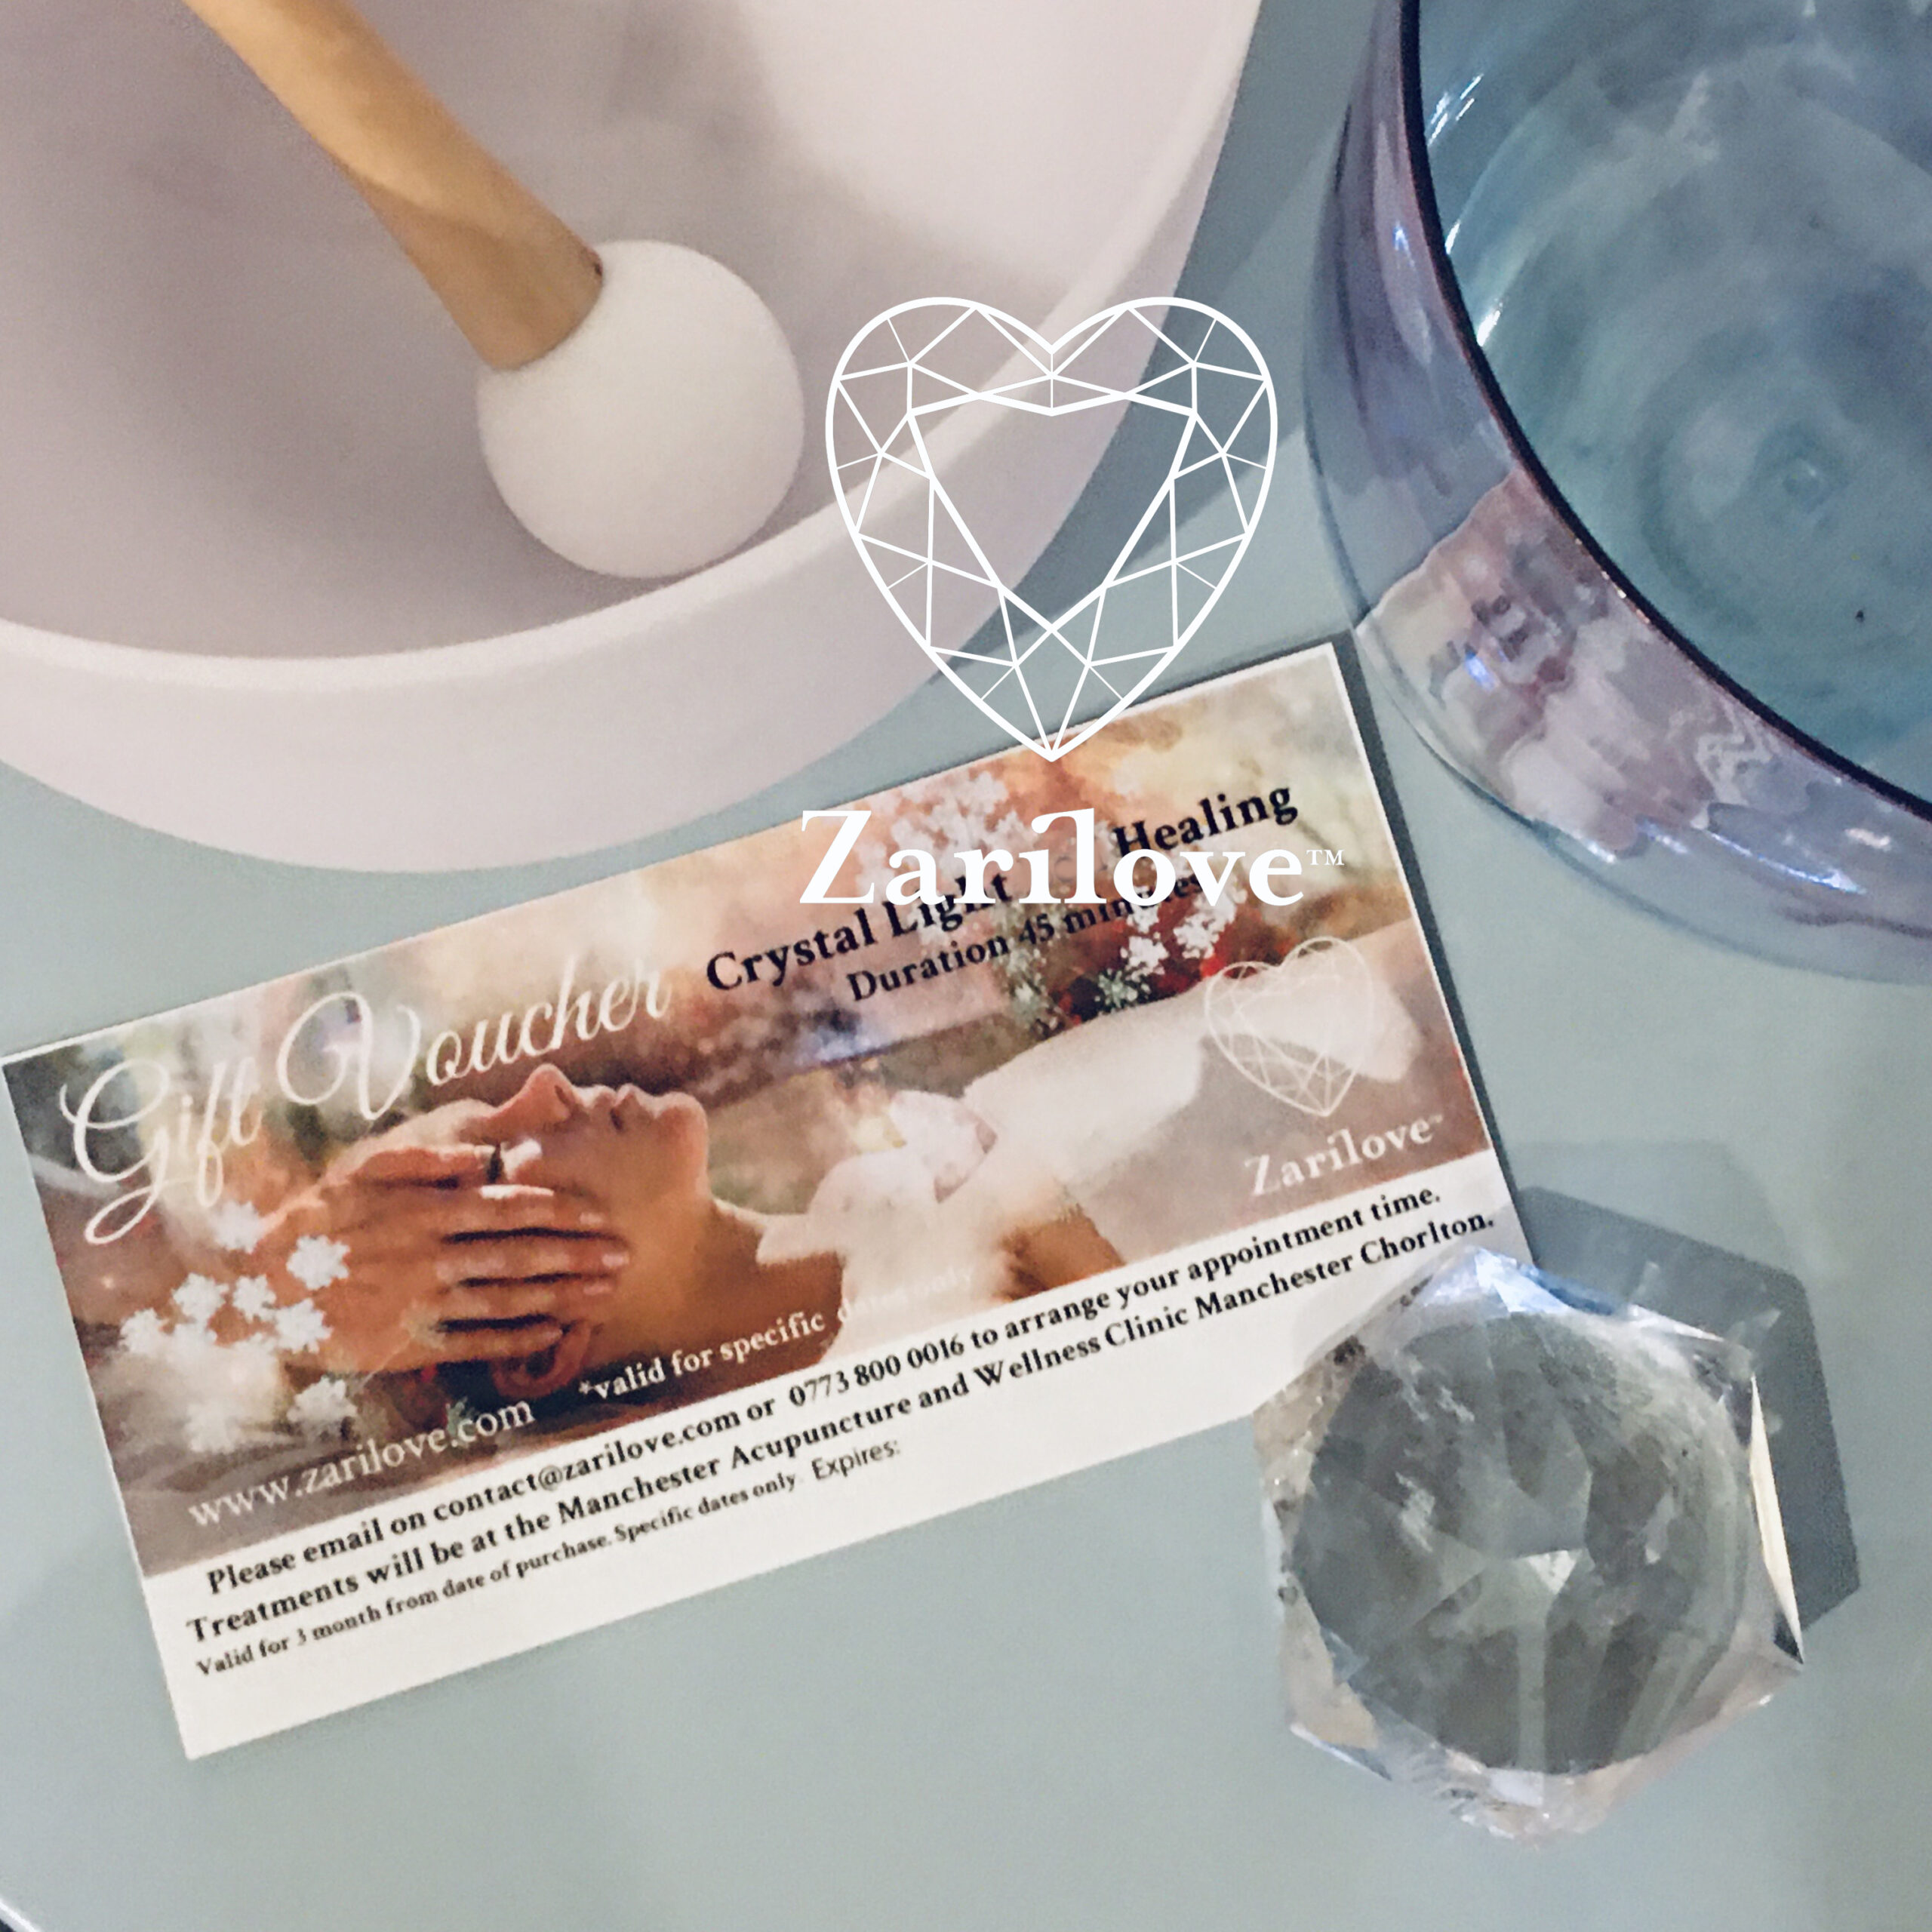 Spiritual Healing and Crystal light bath sessions- Manchester 